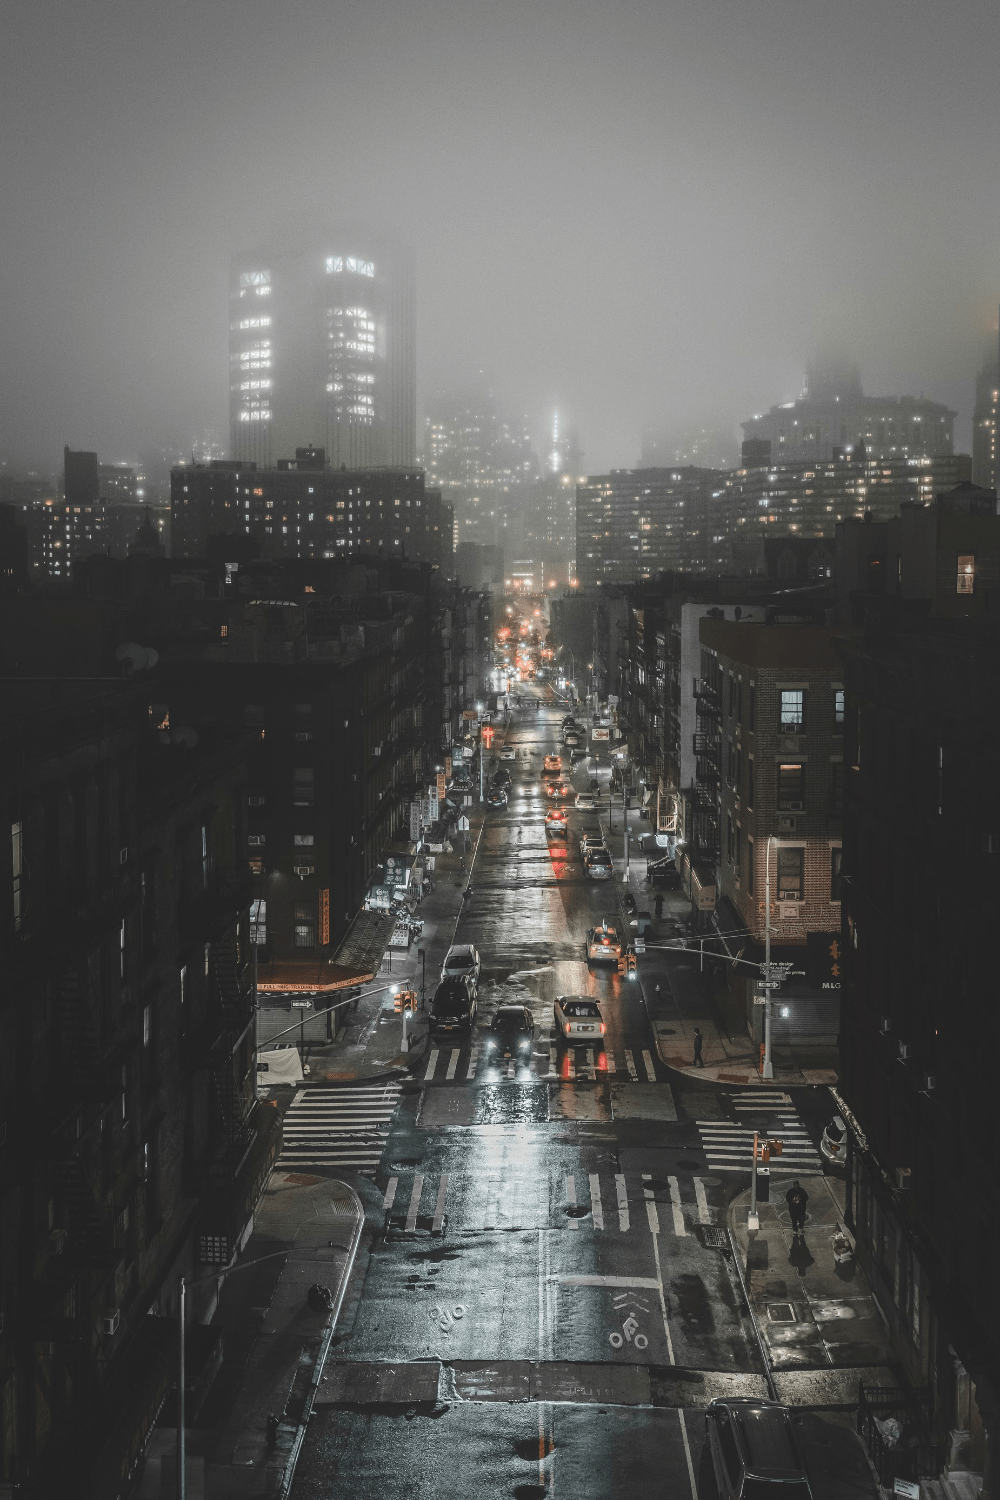 A street in the city at night with cars and pedestrians. - Fog